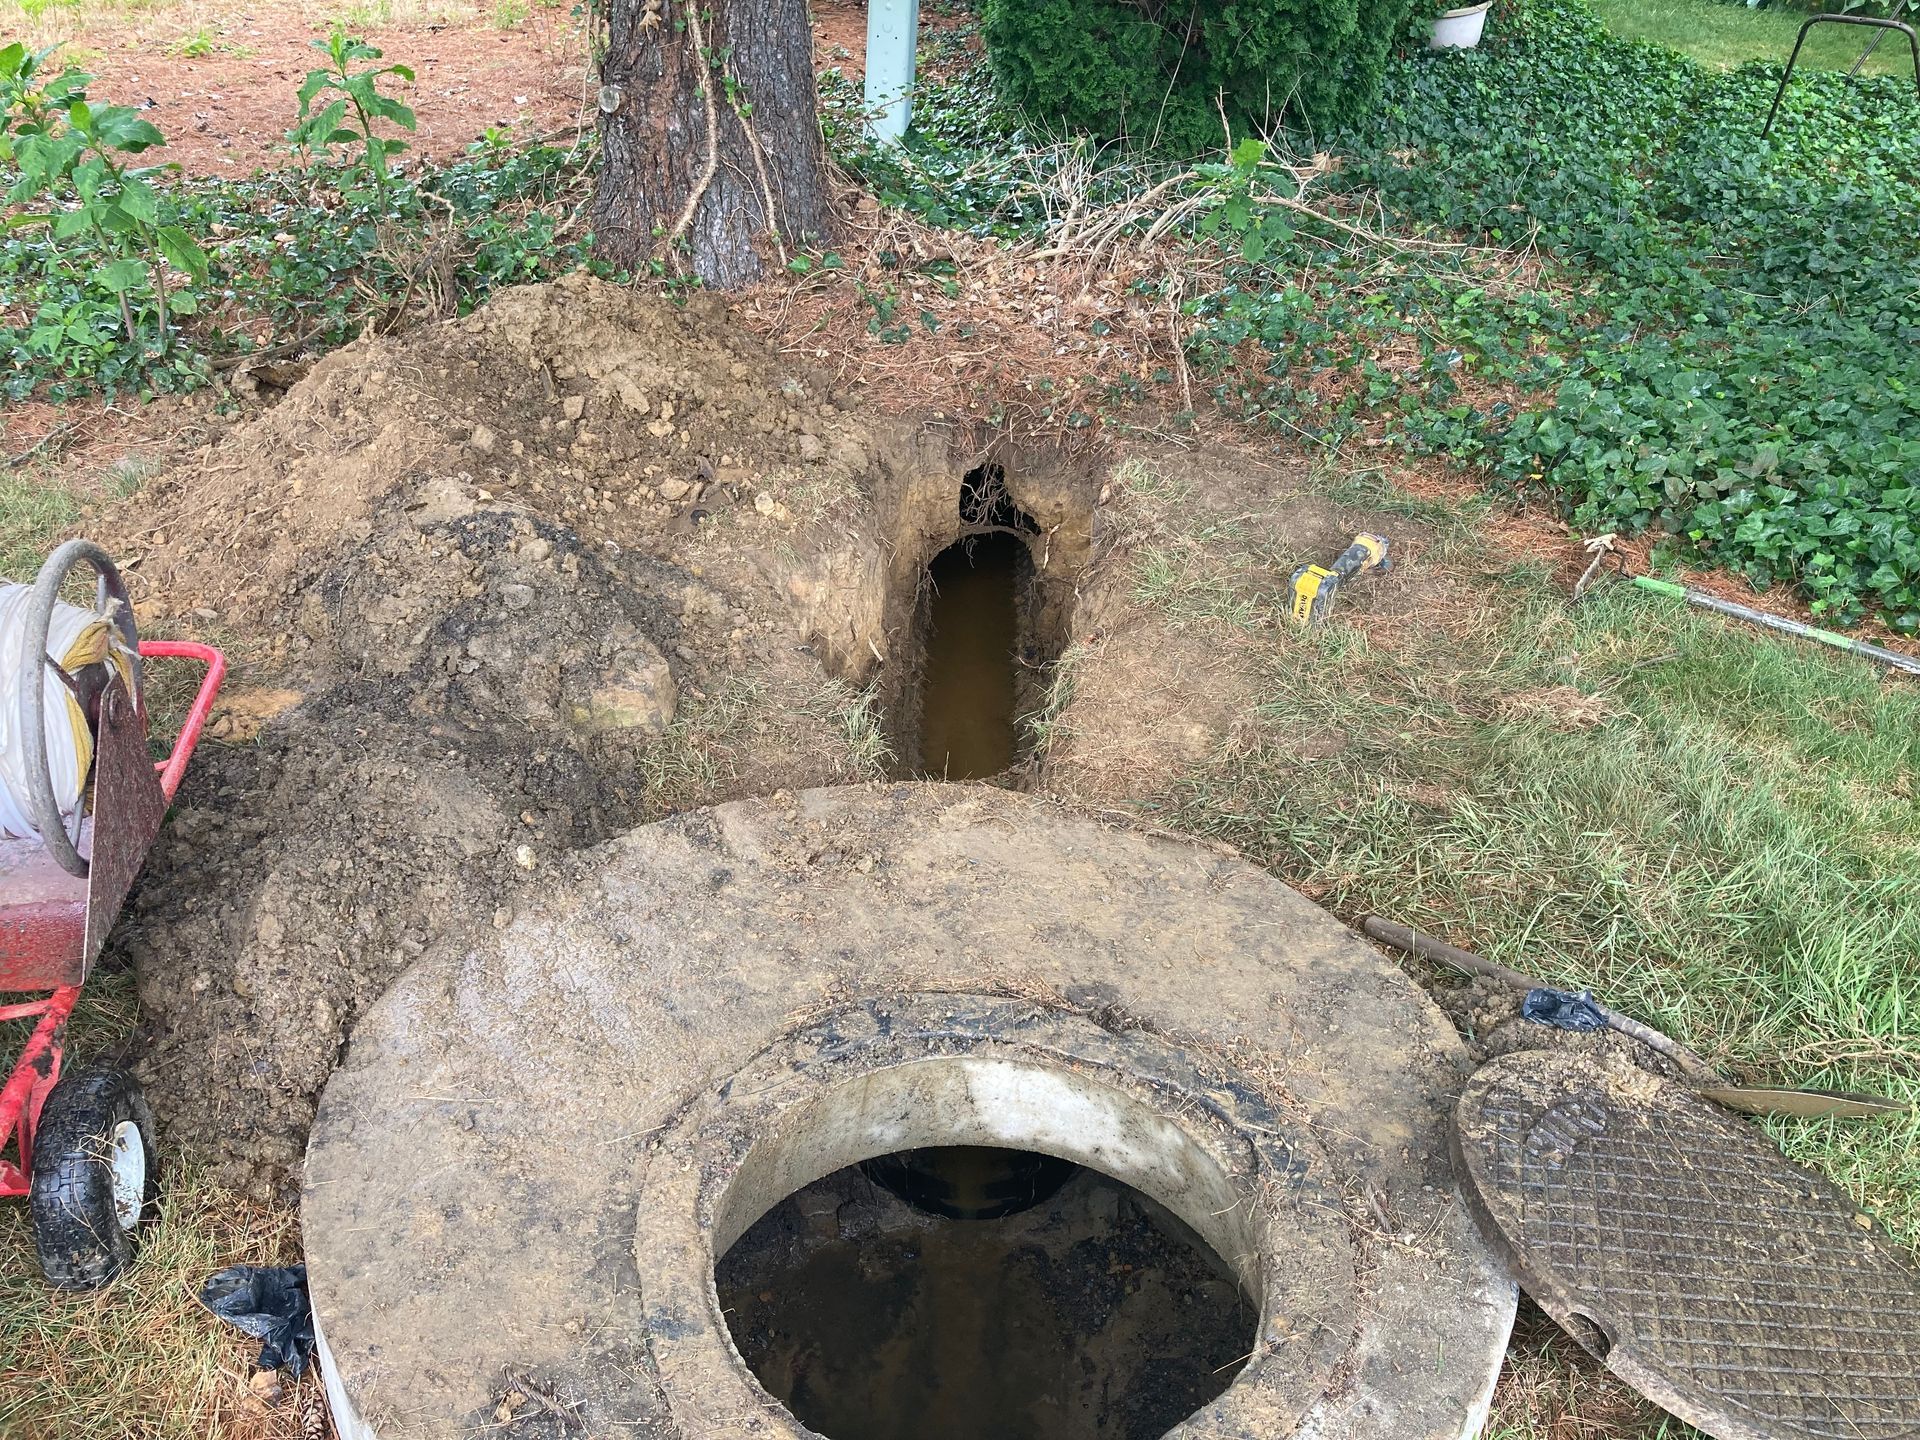 High pressure water eroded soil away after the crown of the stormwater pipe rusted away